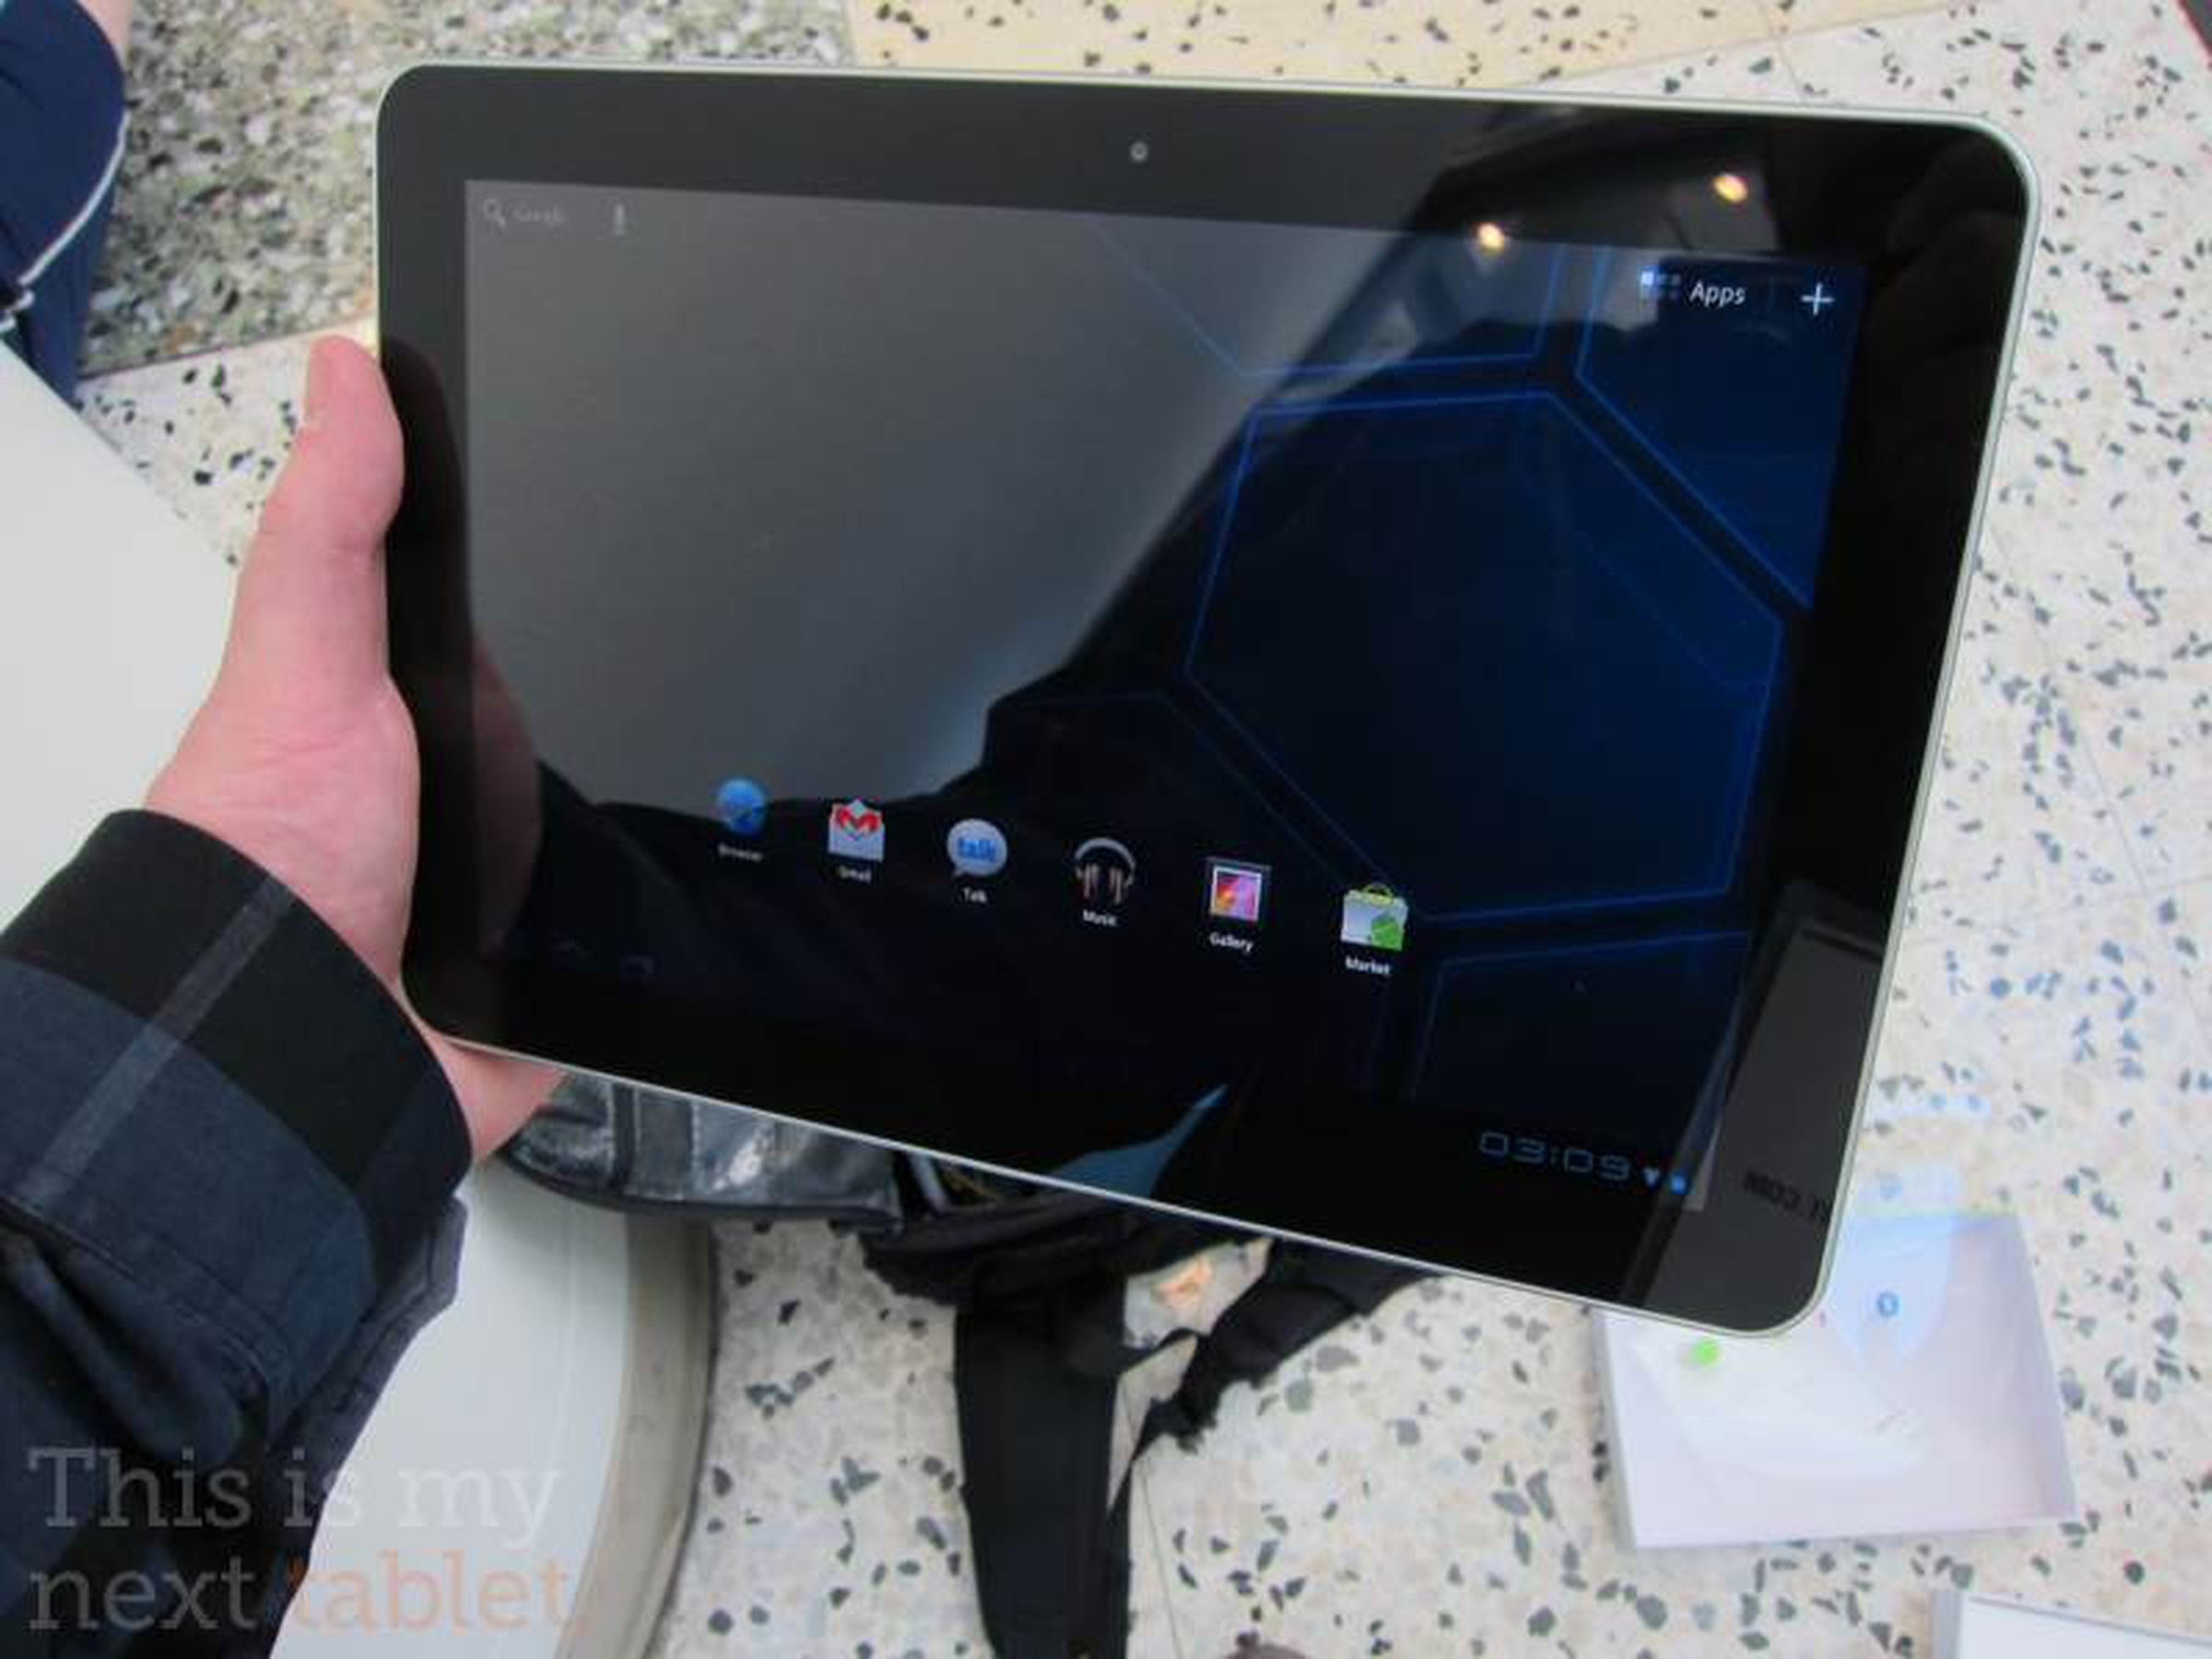 Samsung Galaxy Tab 10.1 (Google I/O Limited Edition) hands-on pictures